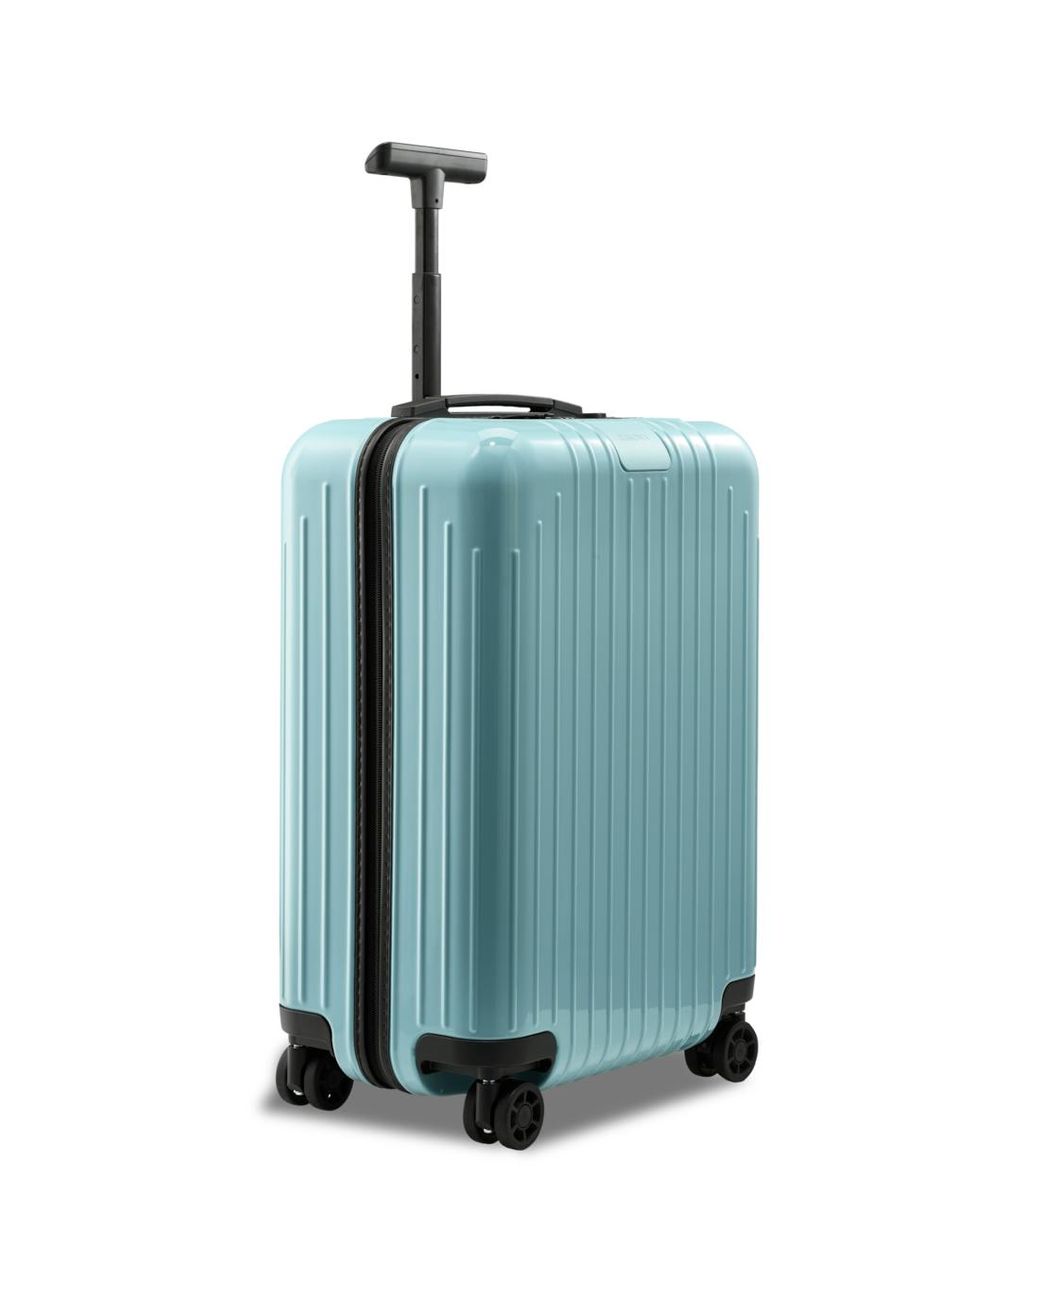 Rimowa Essential Lite Carry-on Review 2021